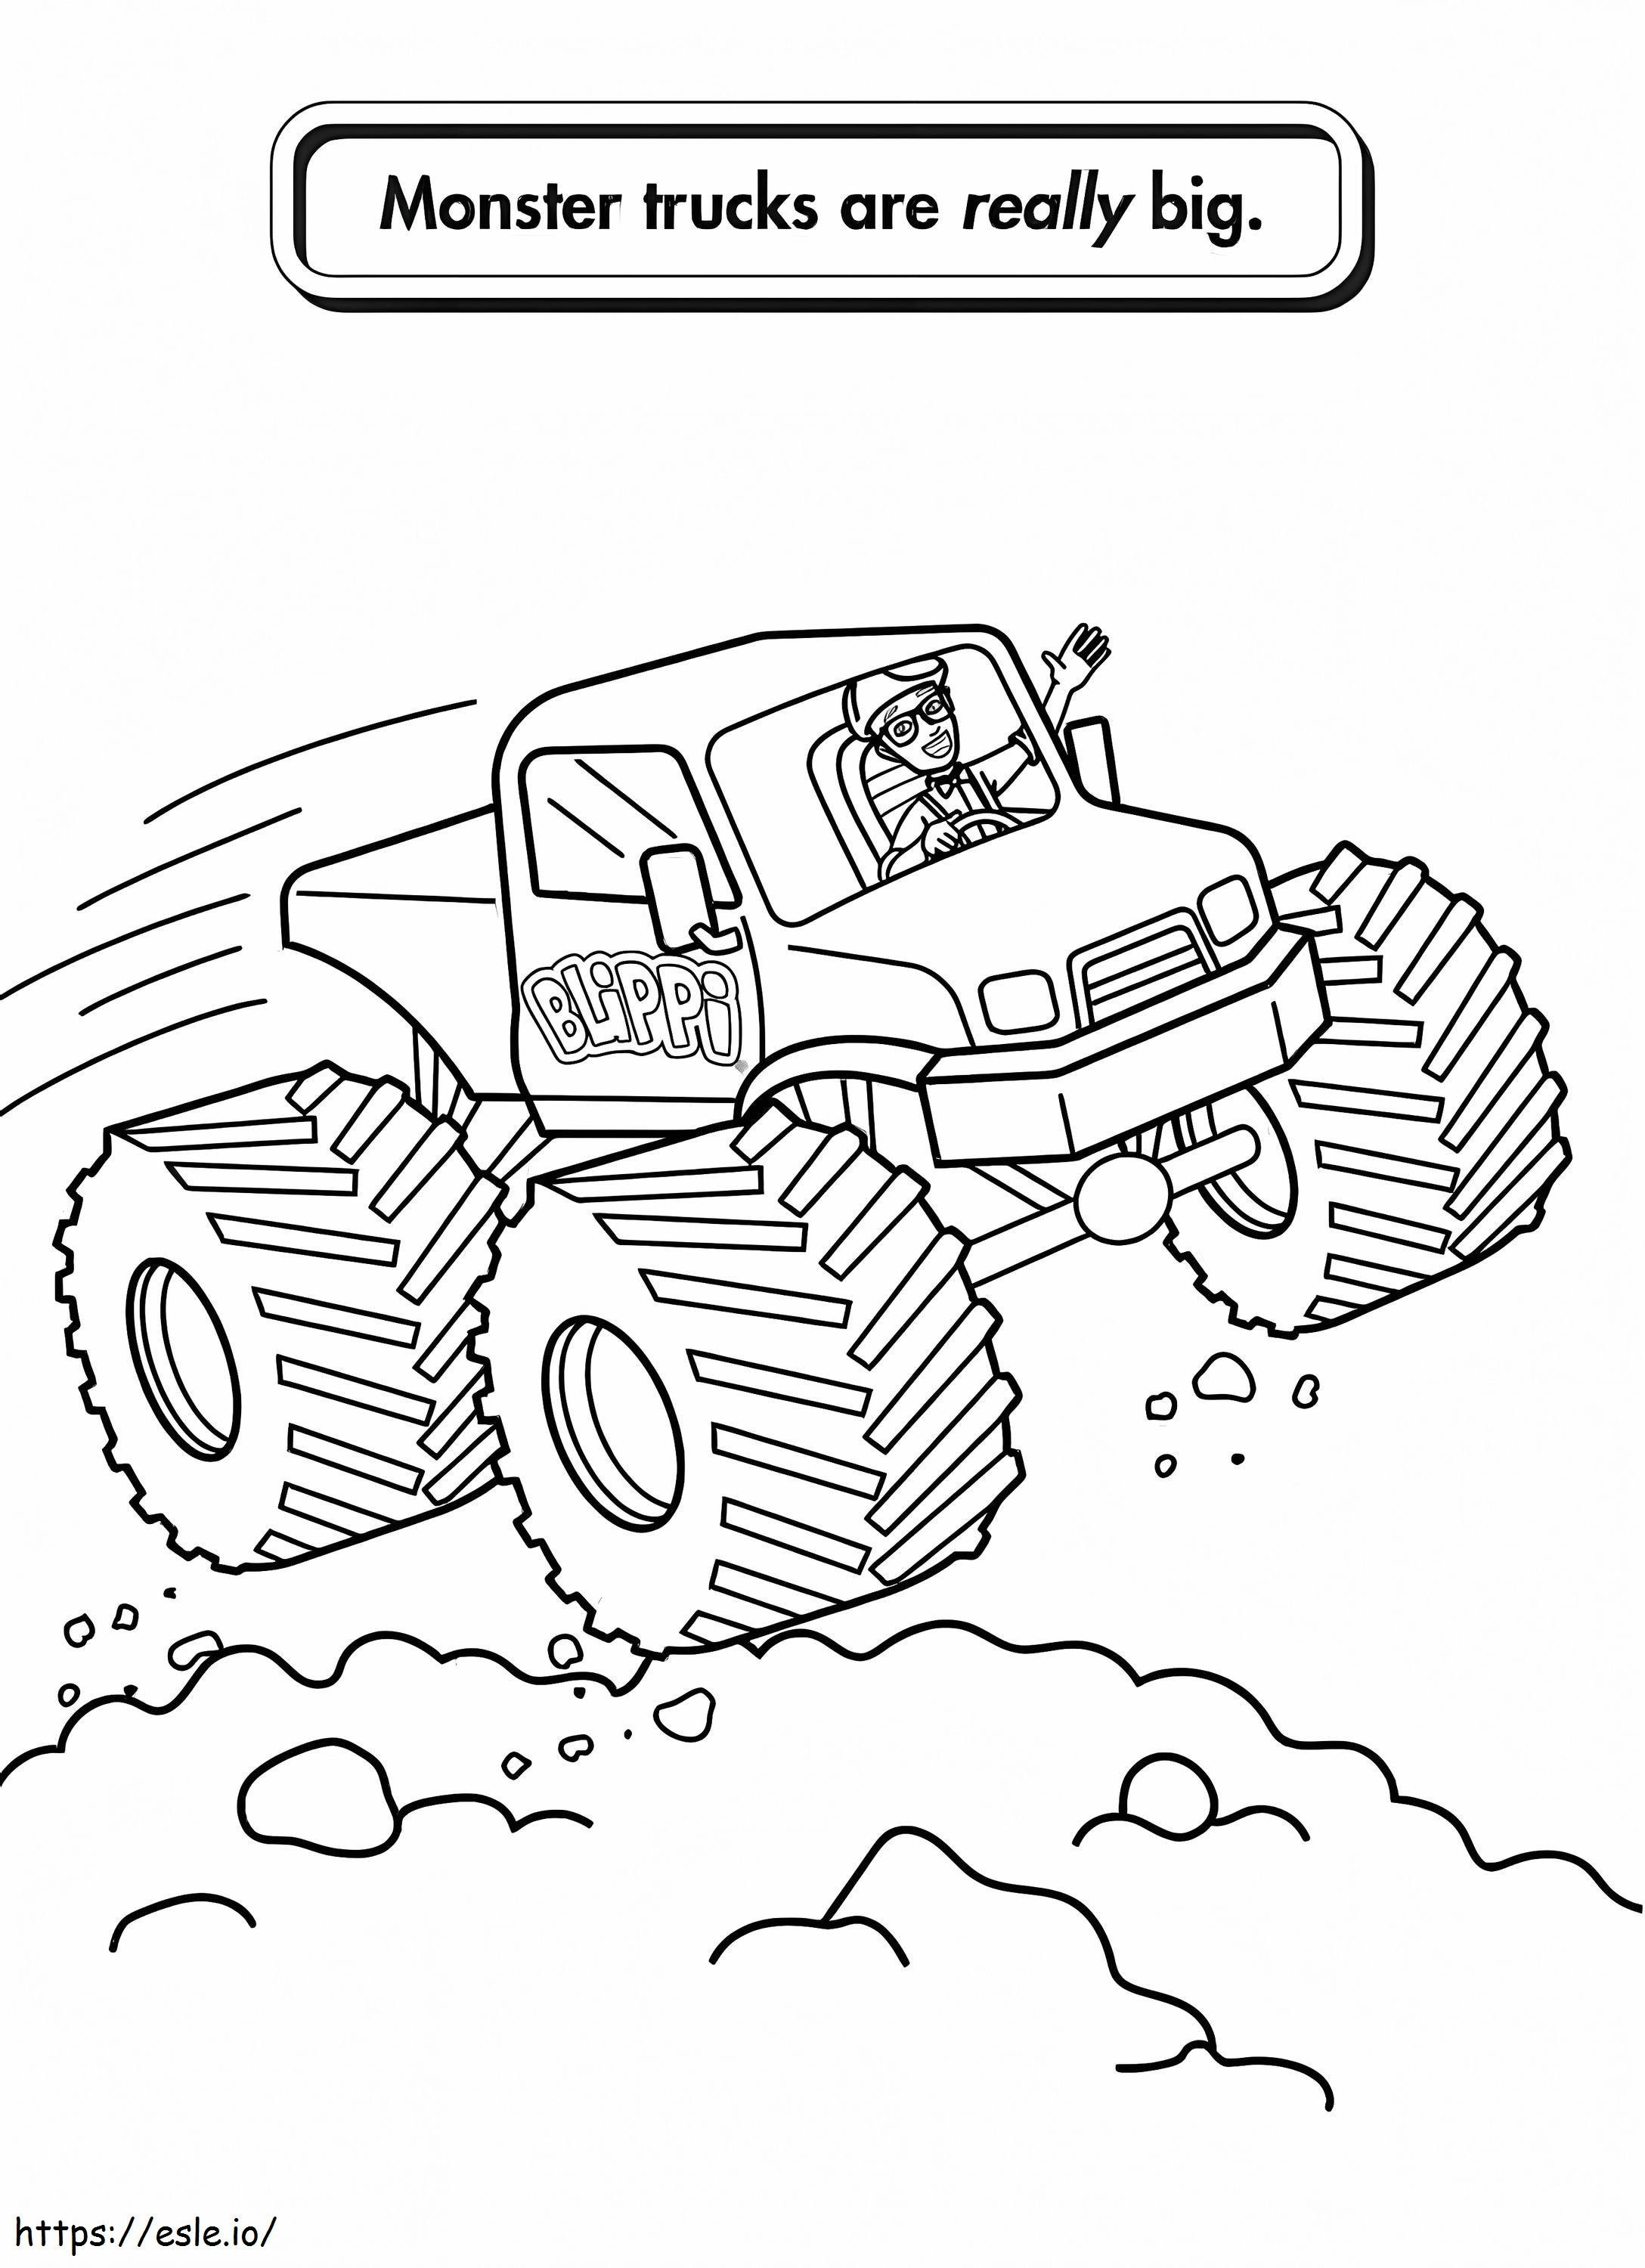 Big Monster Truck coloring page